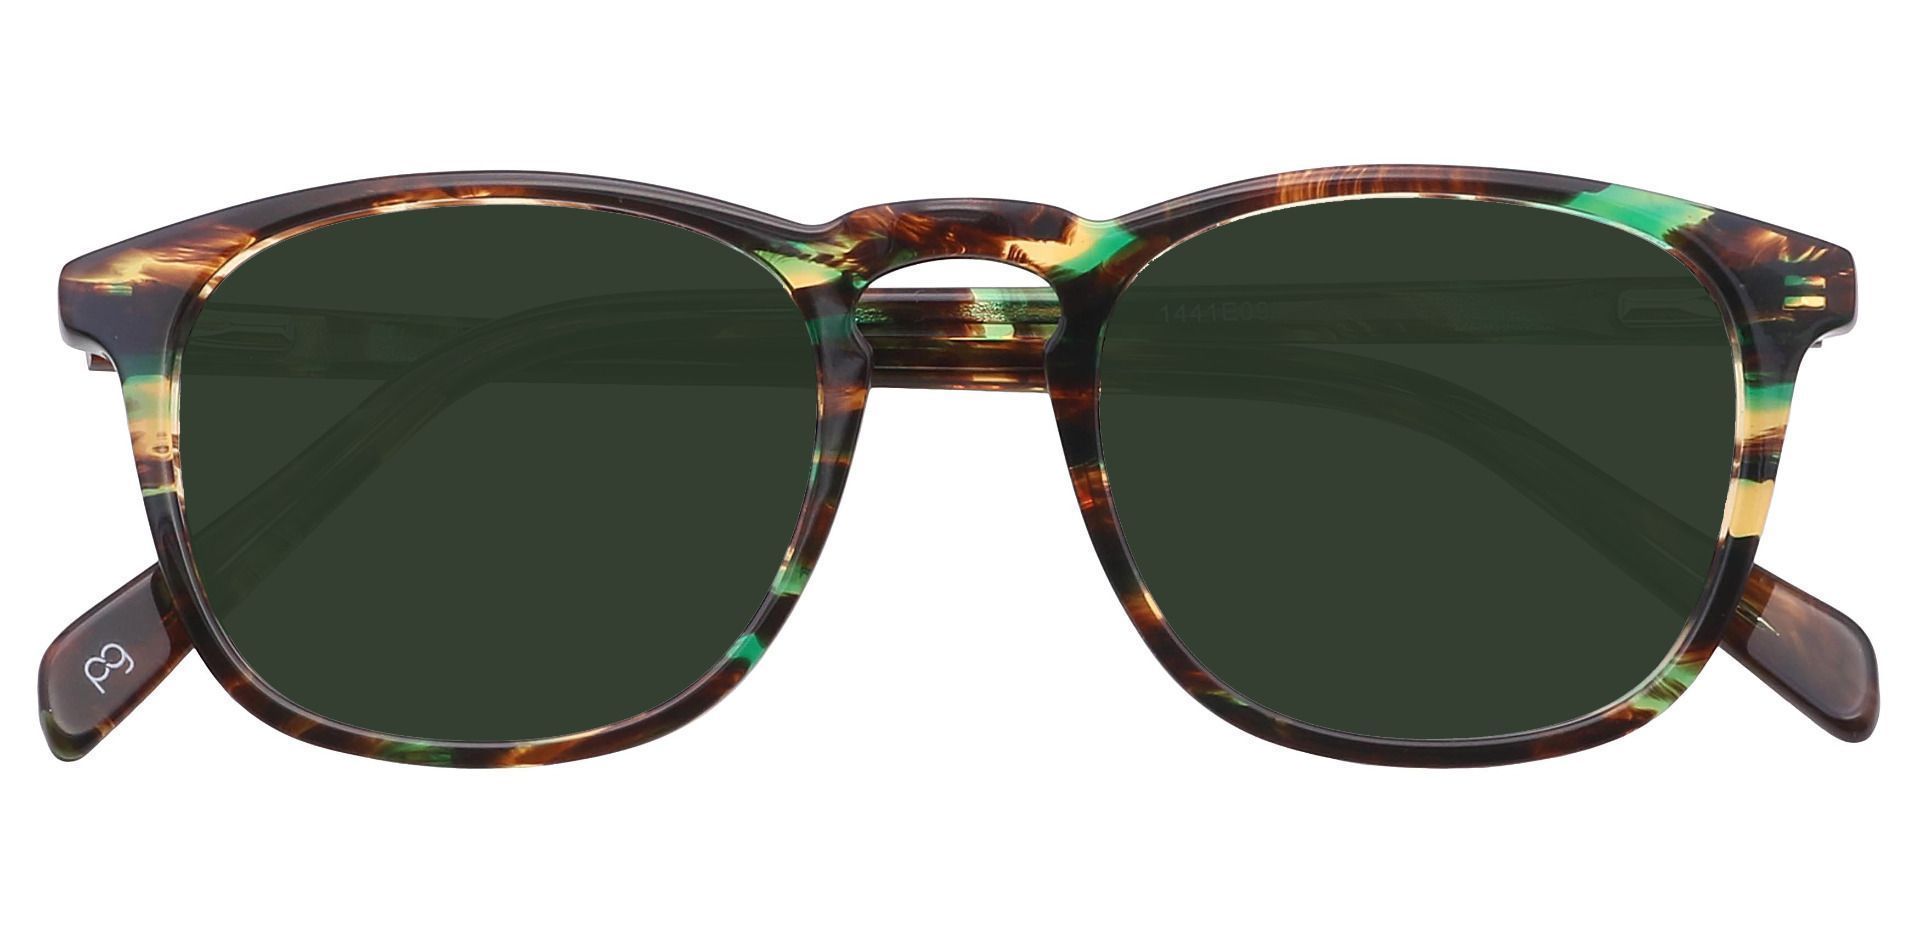 Venti Square Lined Bifocal Sunglasses - Green Frame With Green Lenses